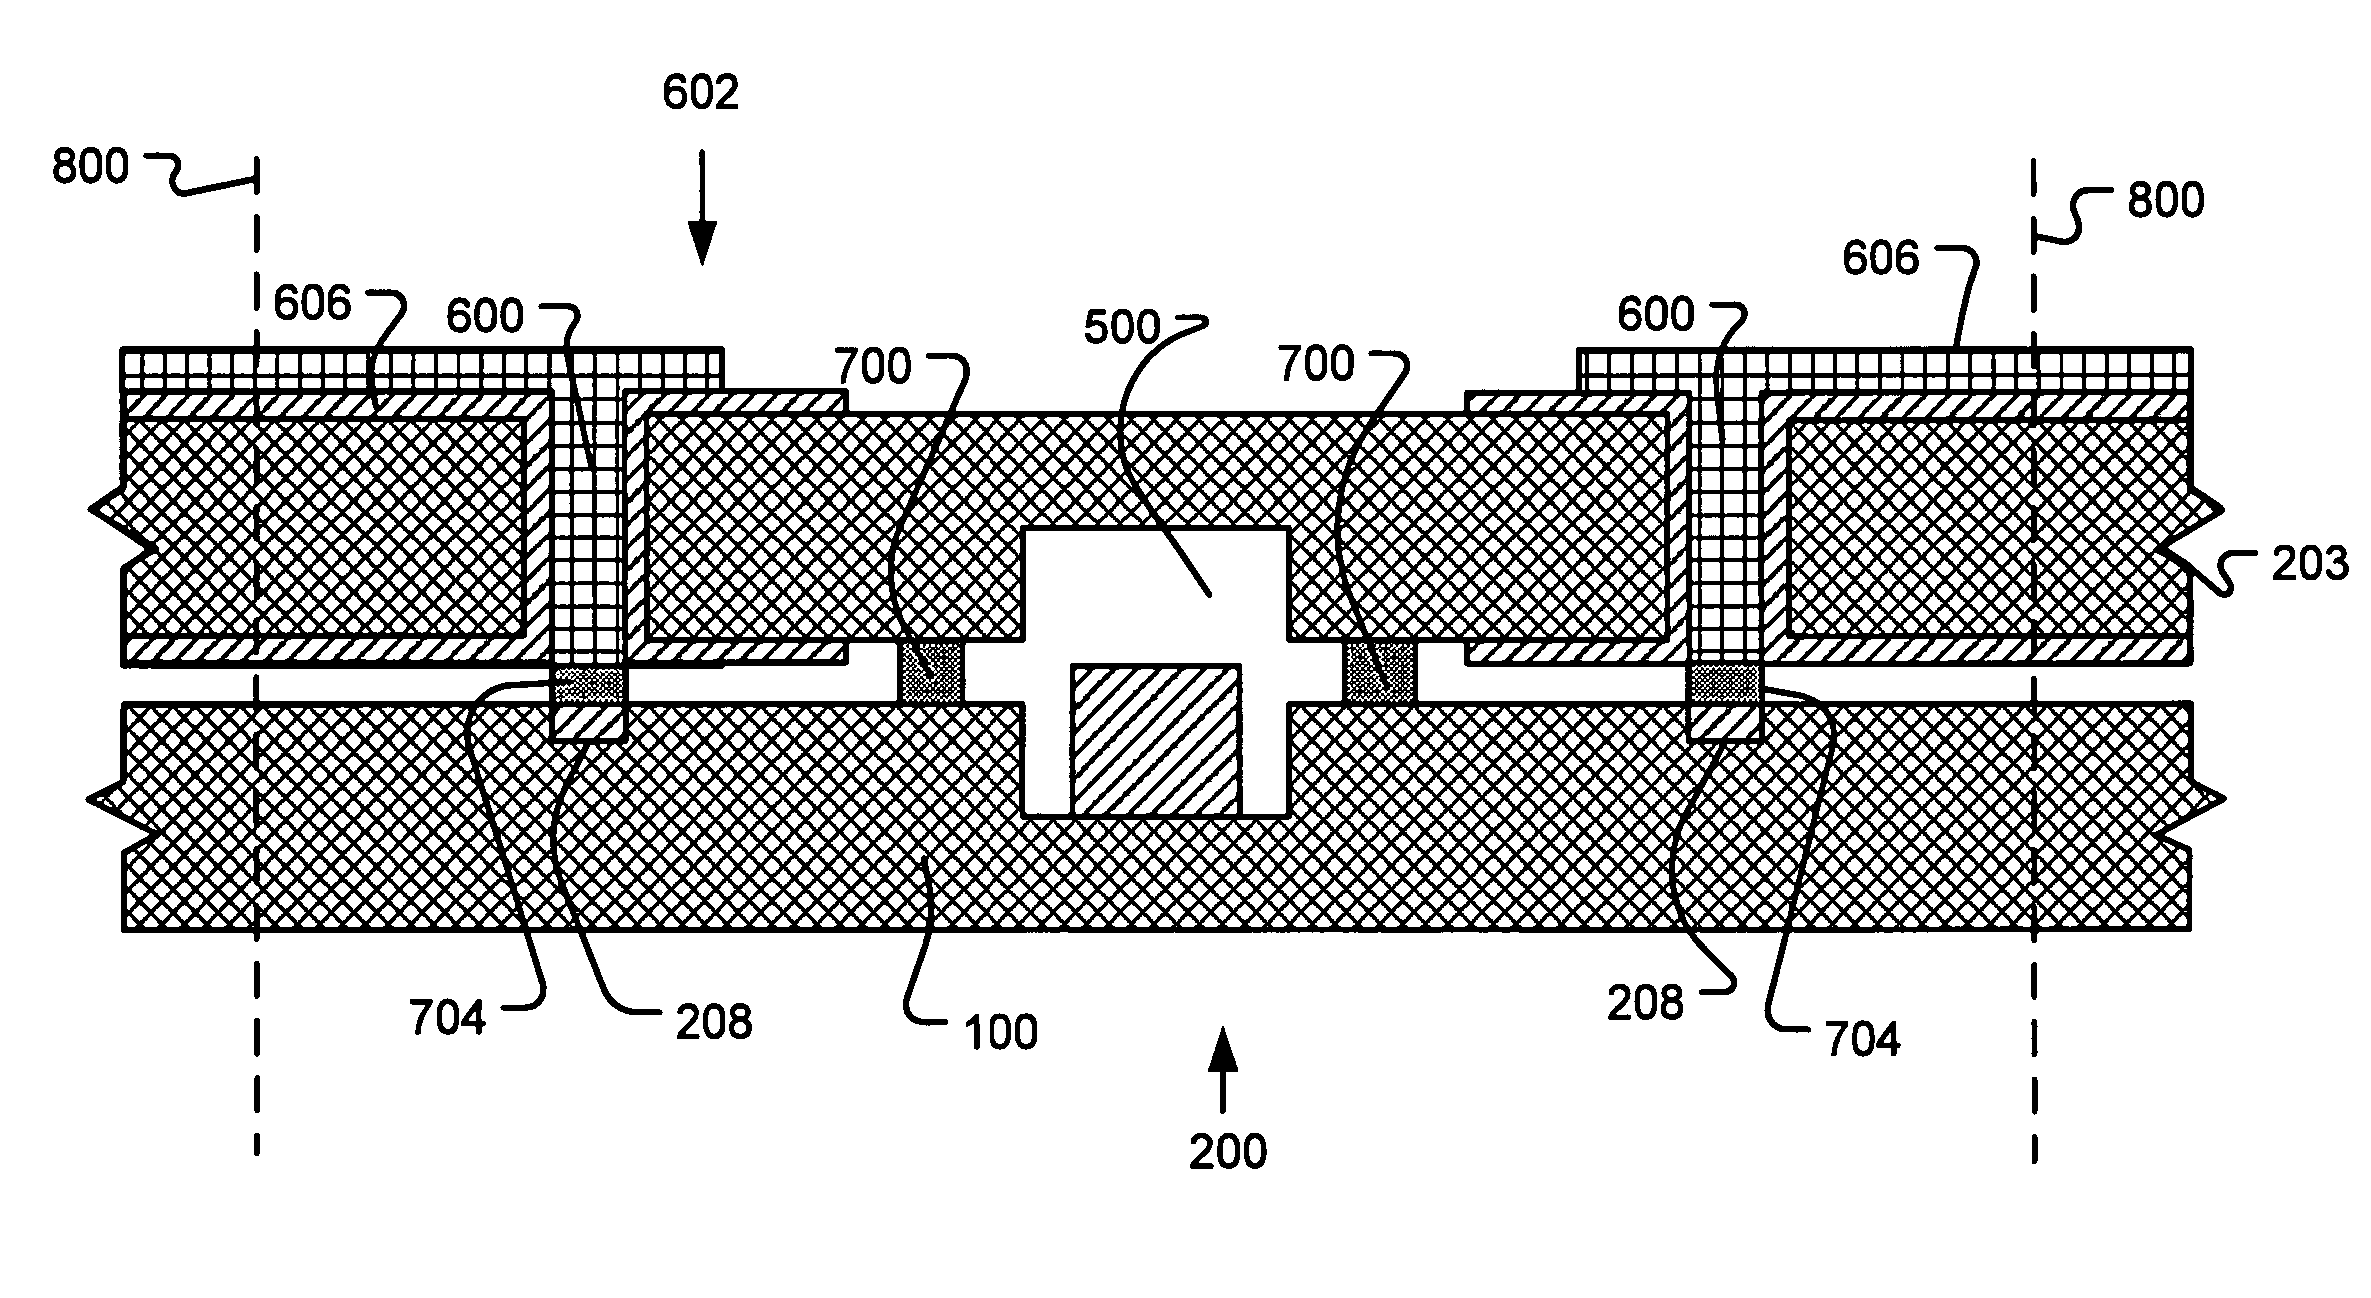 Wafer-level package for integrated circuits